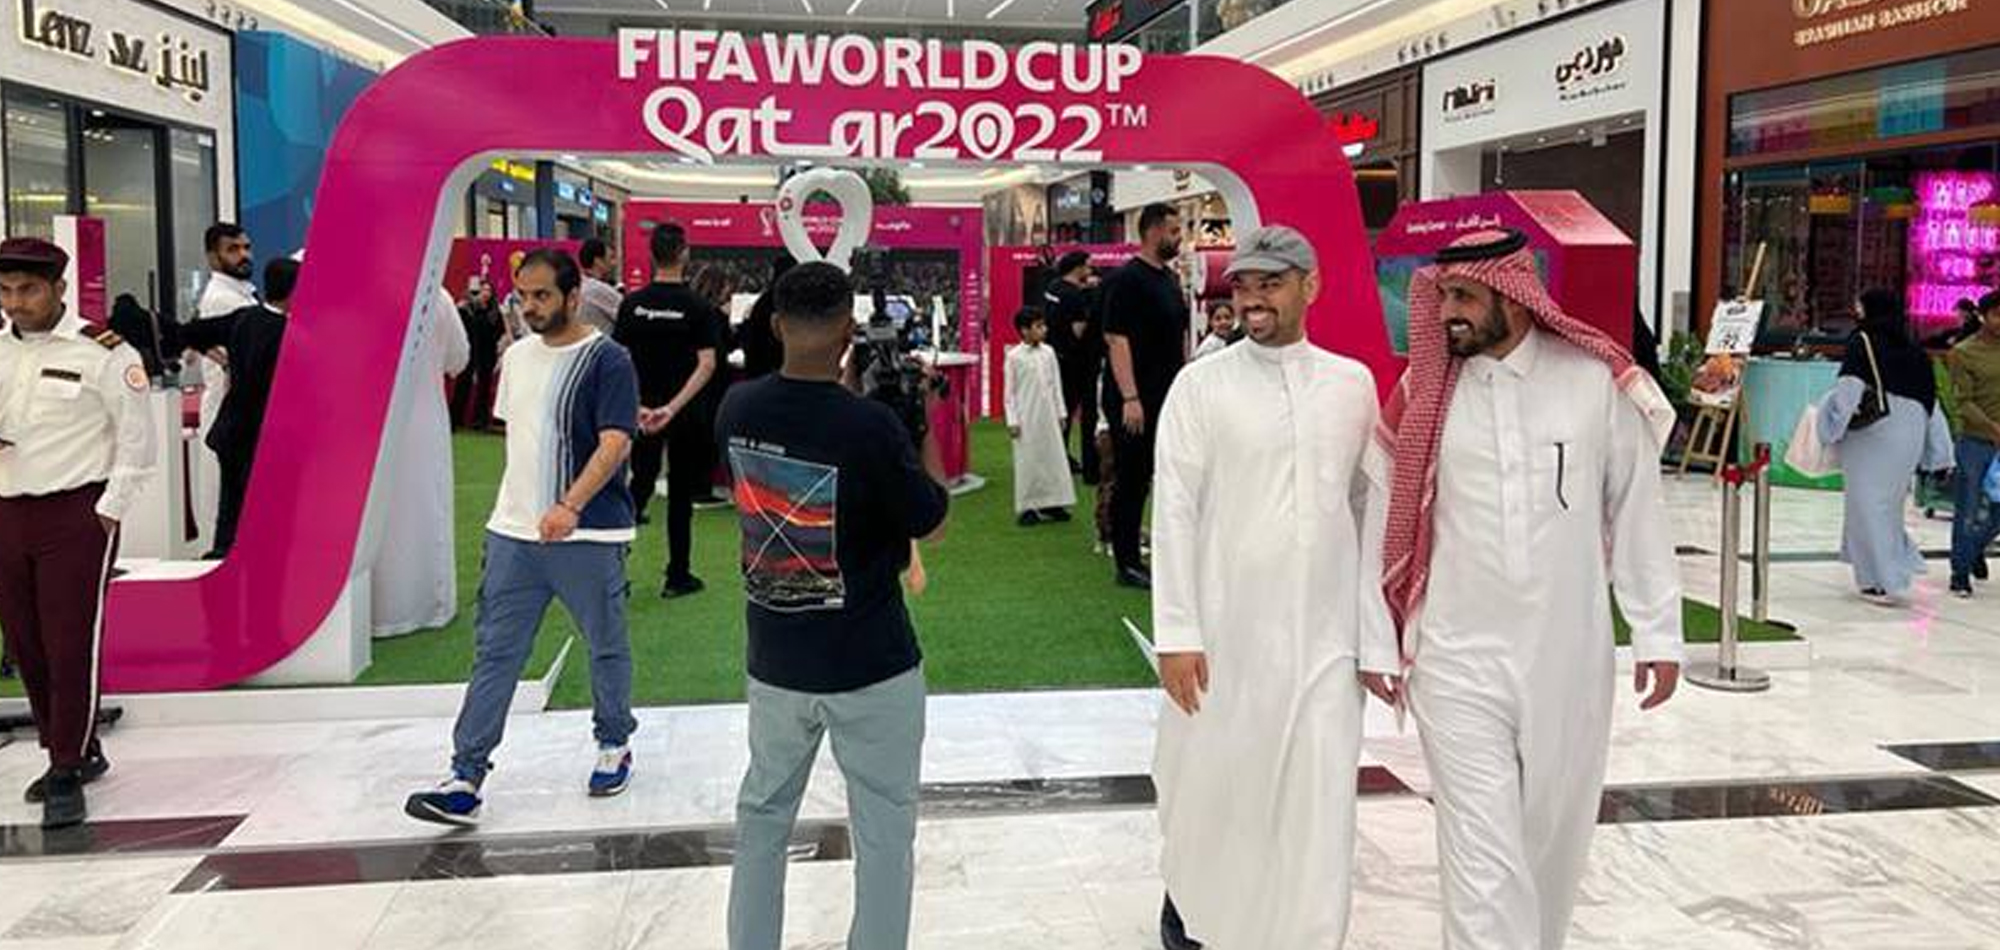 FIFA World Cup Qatar 2022: High Turnout at World Cup Promotional Tour in KSA, UAE